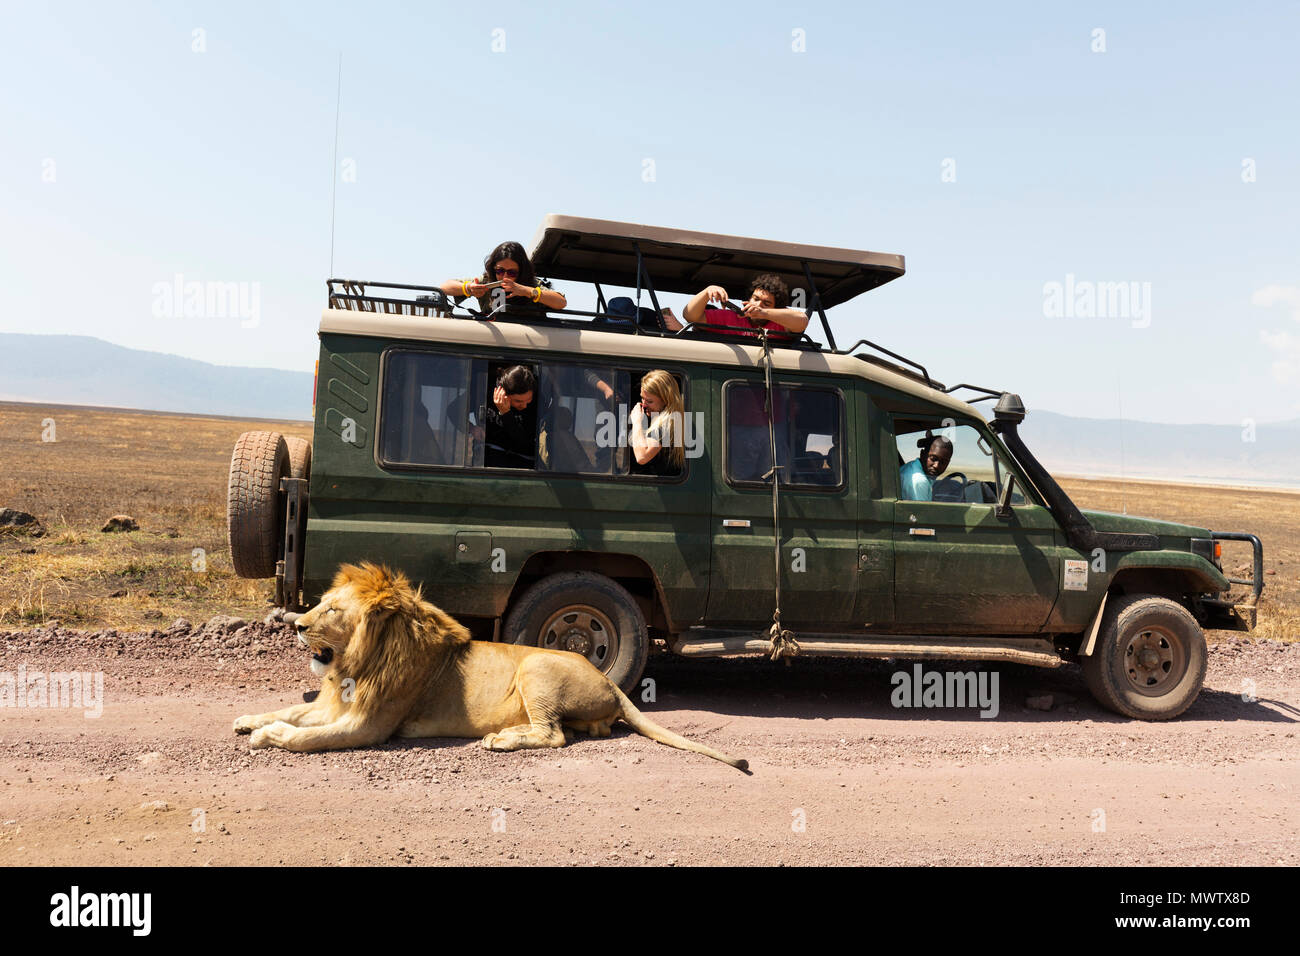 Tourists on a game drive watching a lion (Panthera leo), Ngorongoro Crater Conservation Area, UNESCO, Tanzania, East Africa, Africa Stock Photo